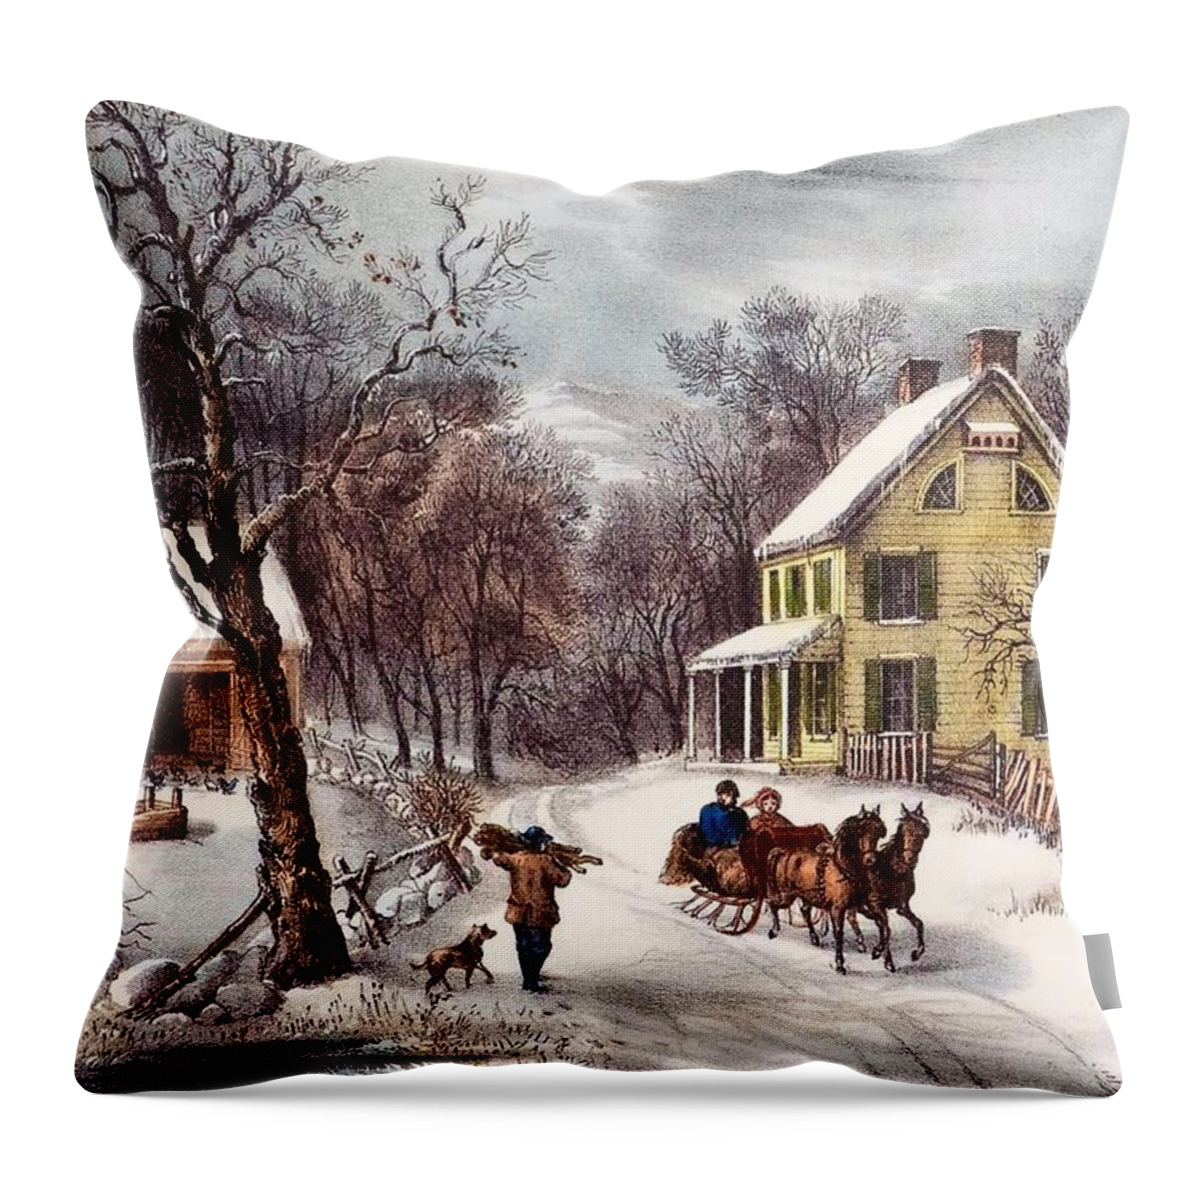 Winter Scene Throw Pillow featuring the painting American Homestead by Currier and Ives